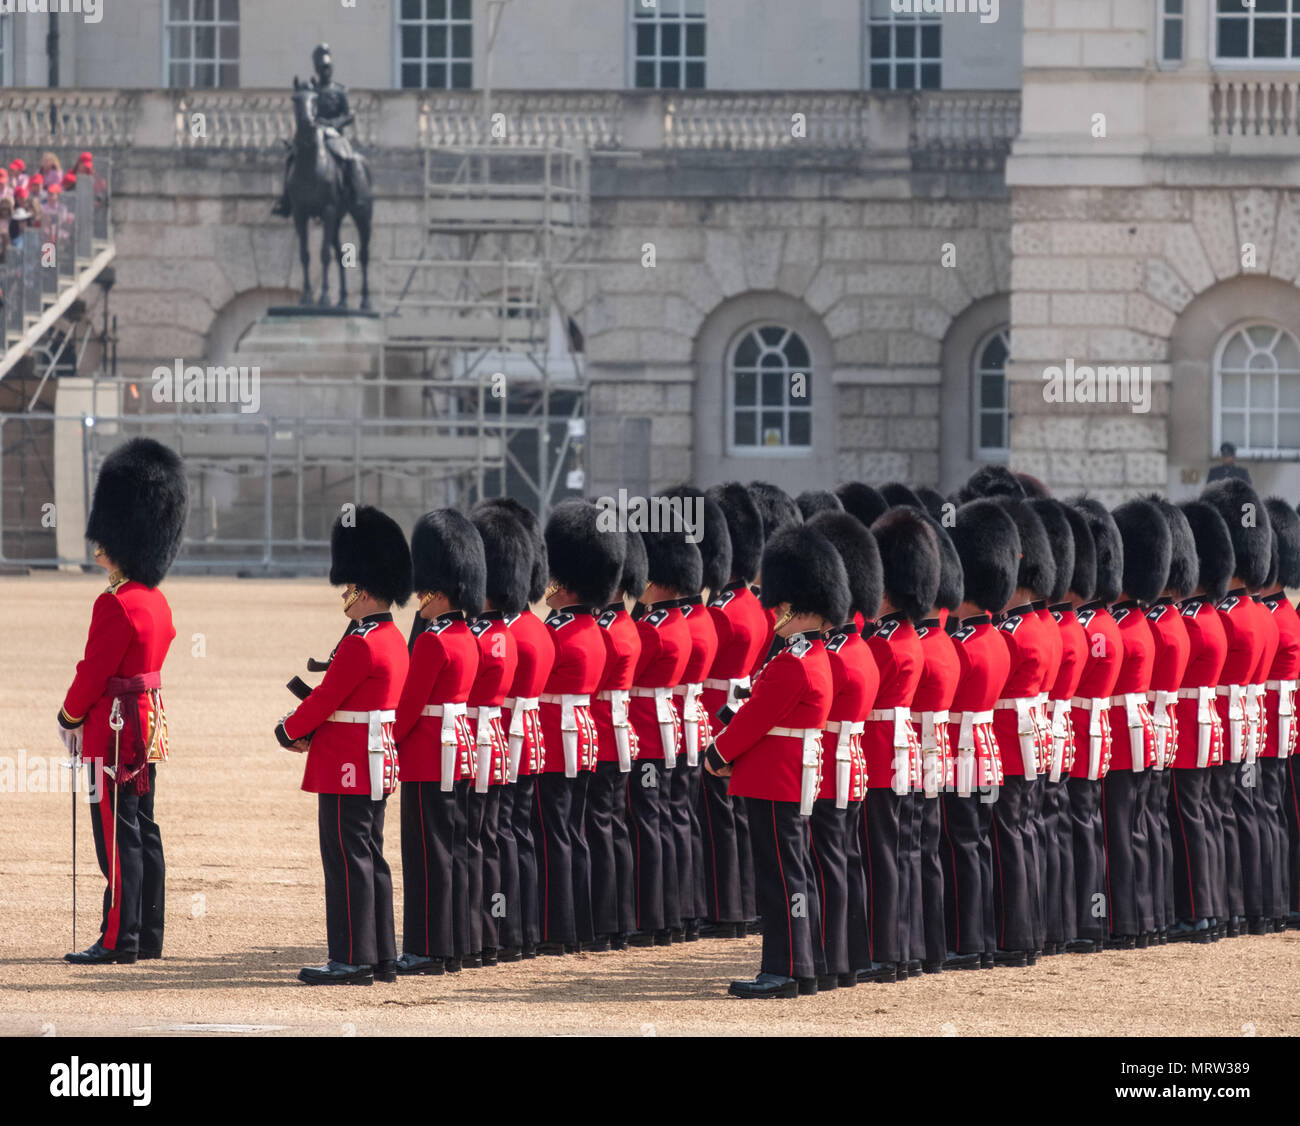 Trooping the Colour military ceremony in London UK, with Coldstream Guards lined up in their red and black traditional uniform and bearskin hats Stock Photo